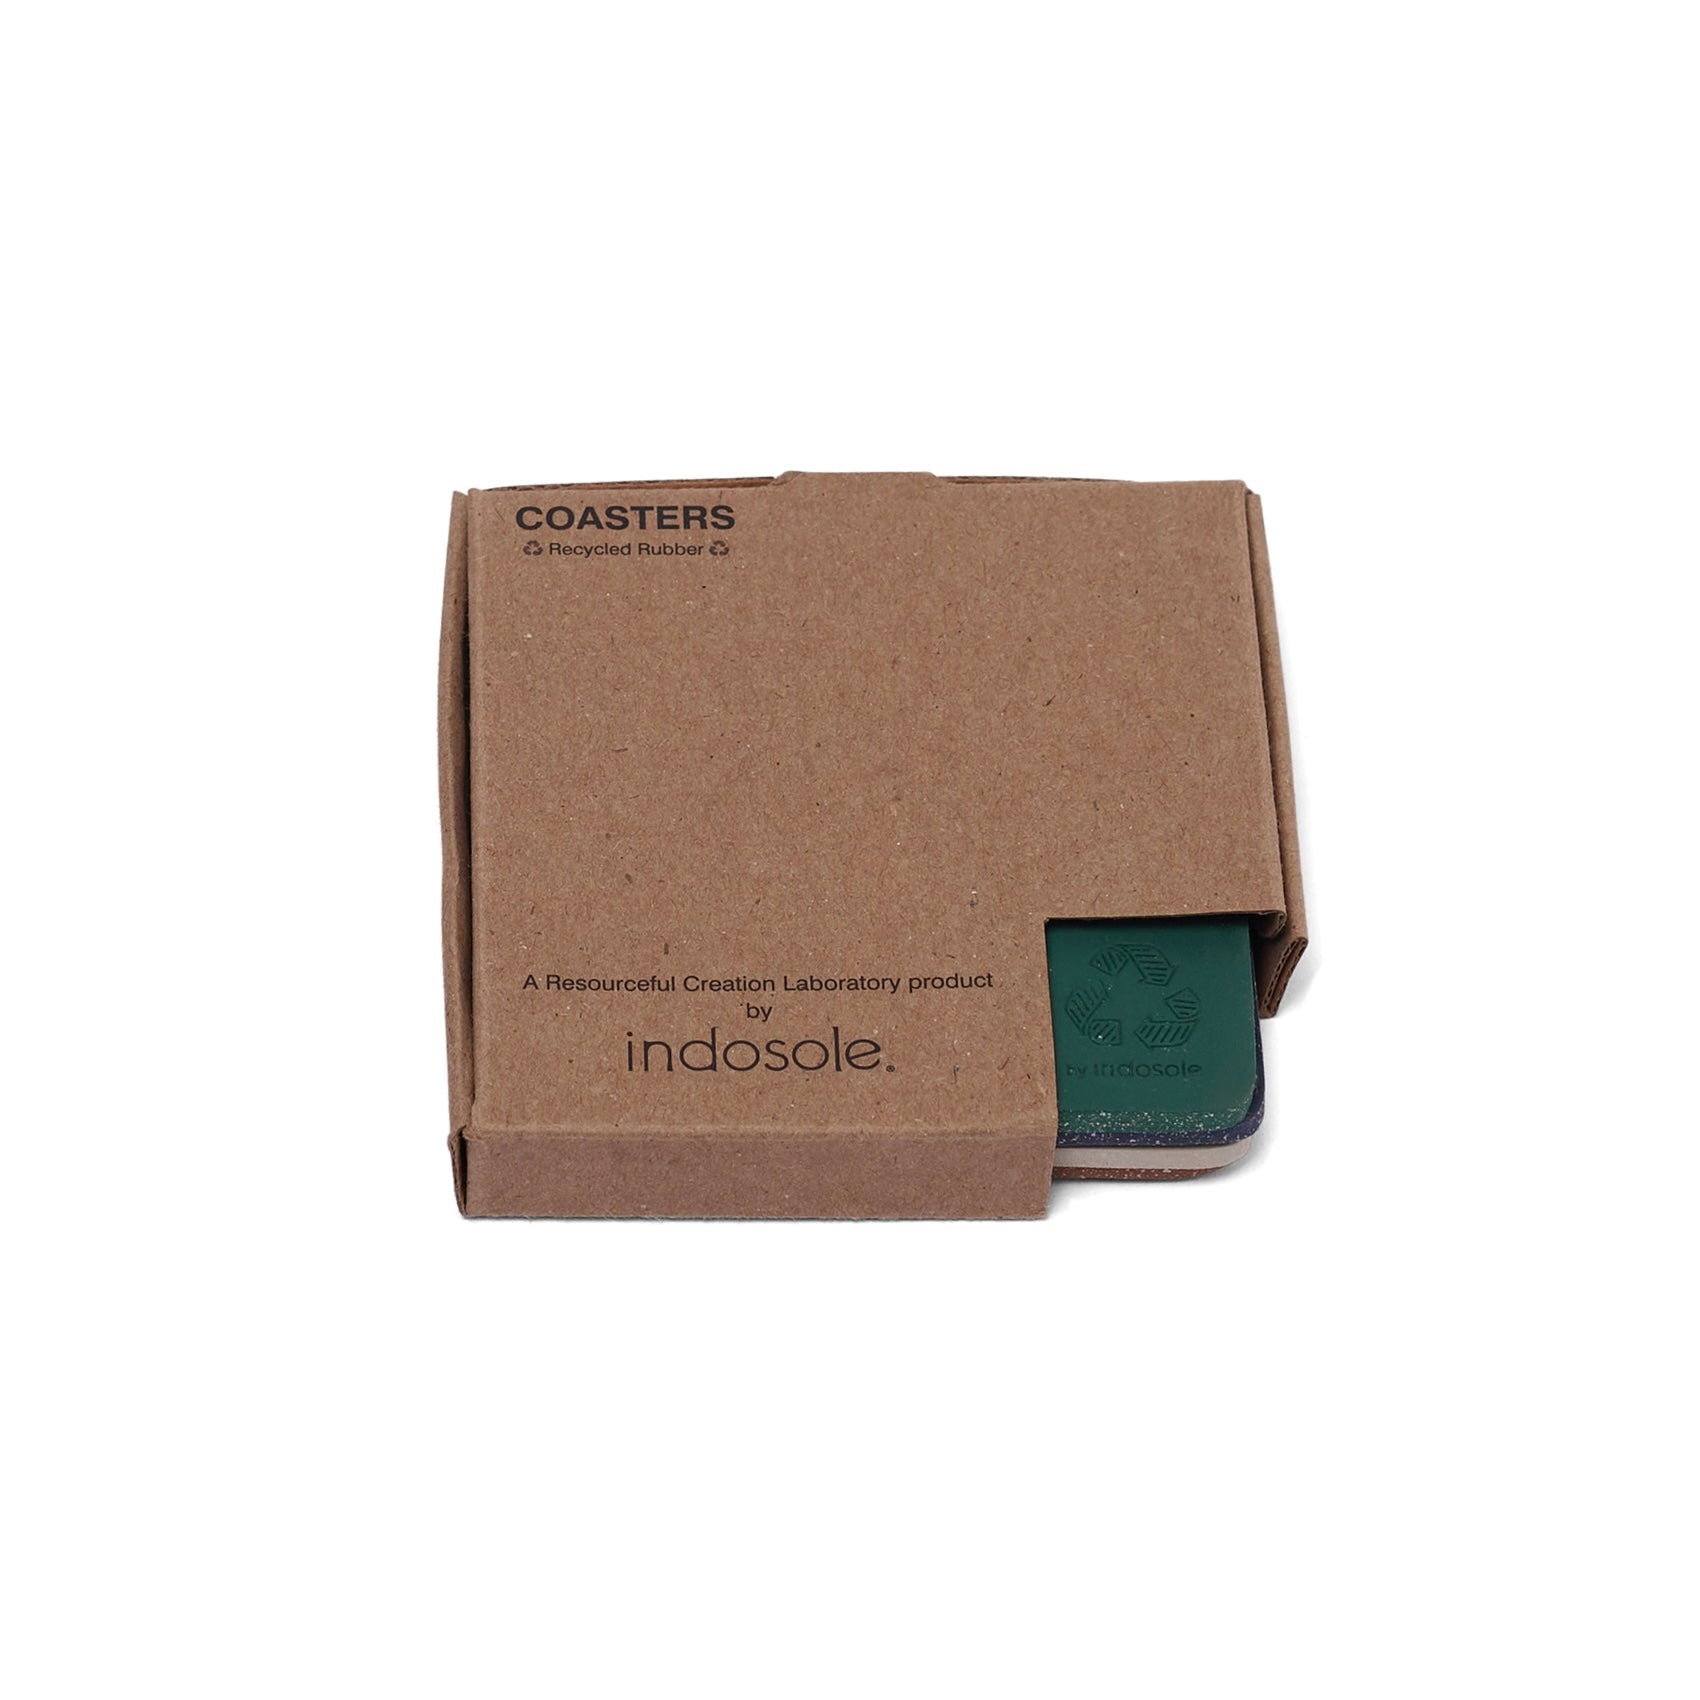 coasters recycled rubbers by Indosole